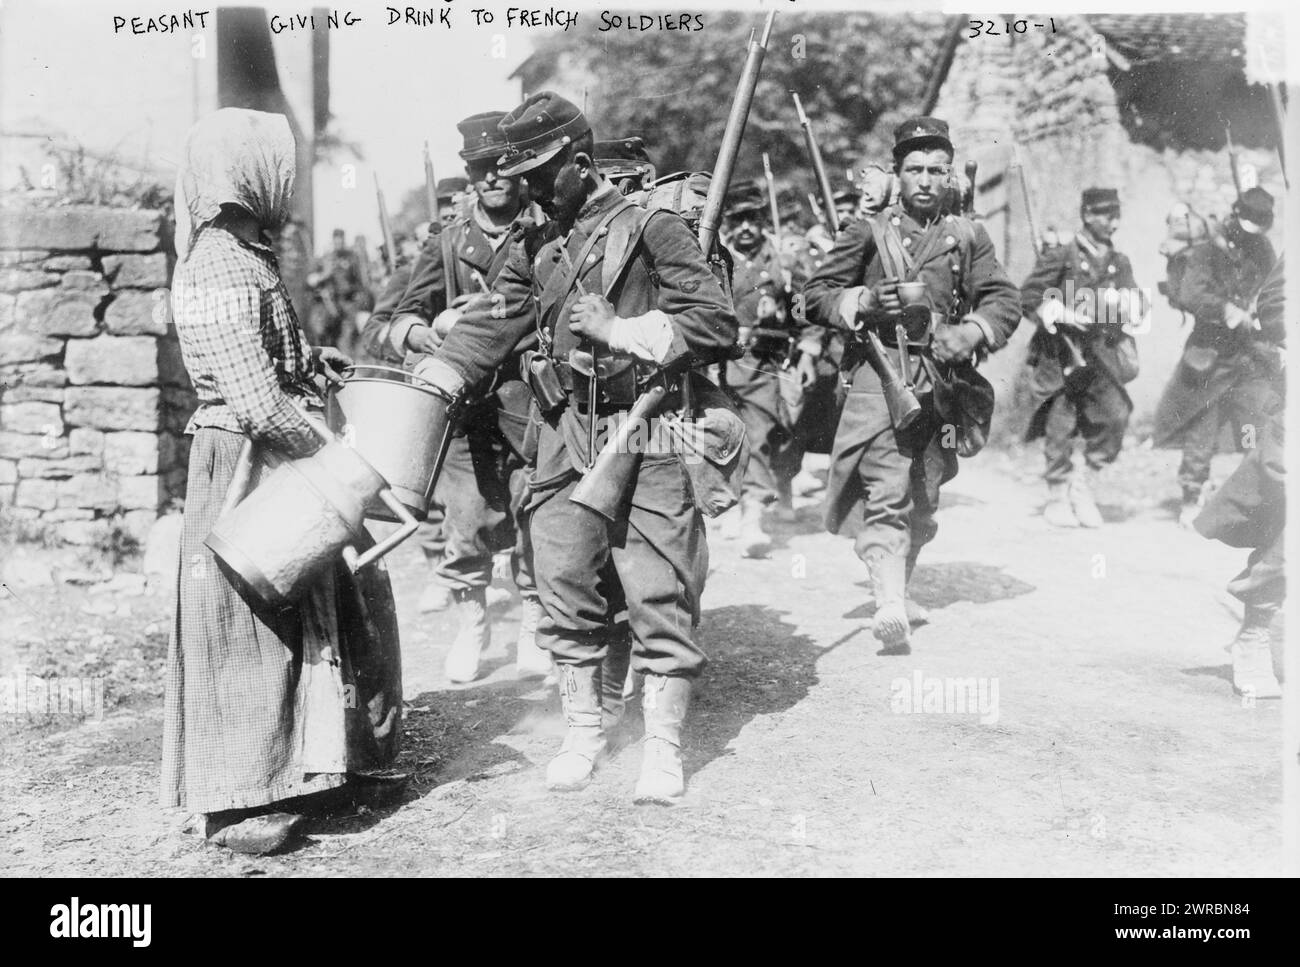 Peasant giving drink to French soldiers, Photograph shows a woman giving water to French soldiers at the beginning of World War I., between ca. 1914 and ca. 1915, World War, 1914-1918, Glass negatives, 1 negative: glass Stock Photo